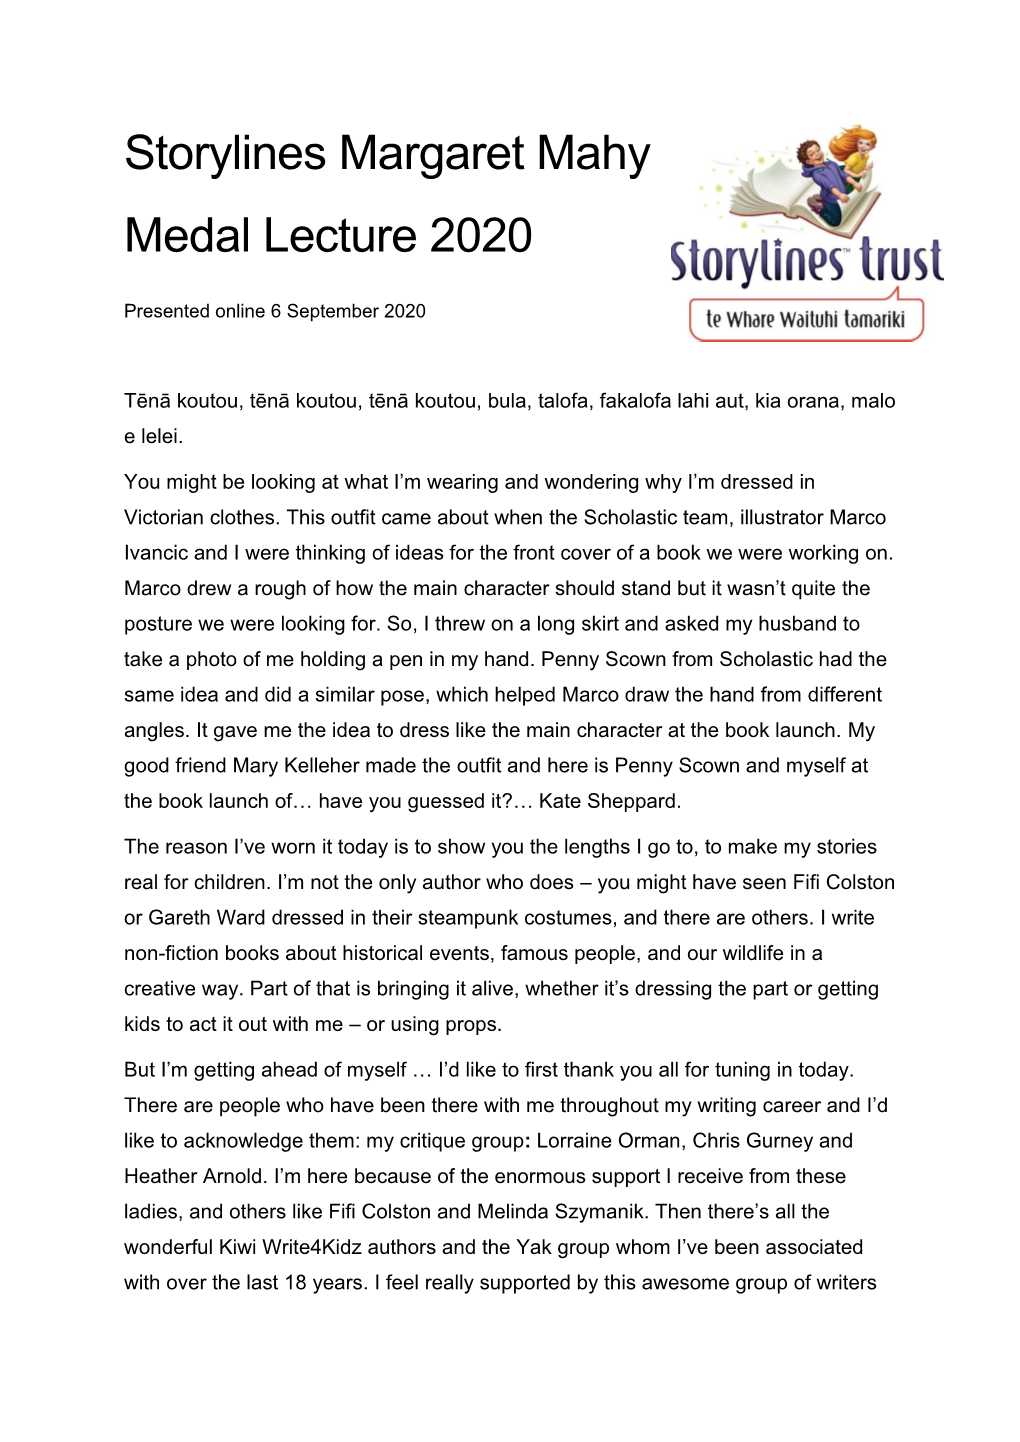 Storylines Margaret Mahy Medal Lecture 2020